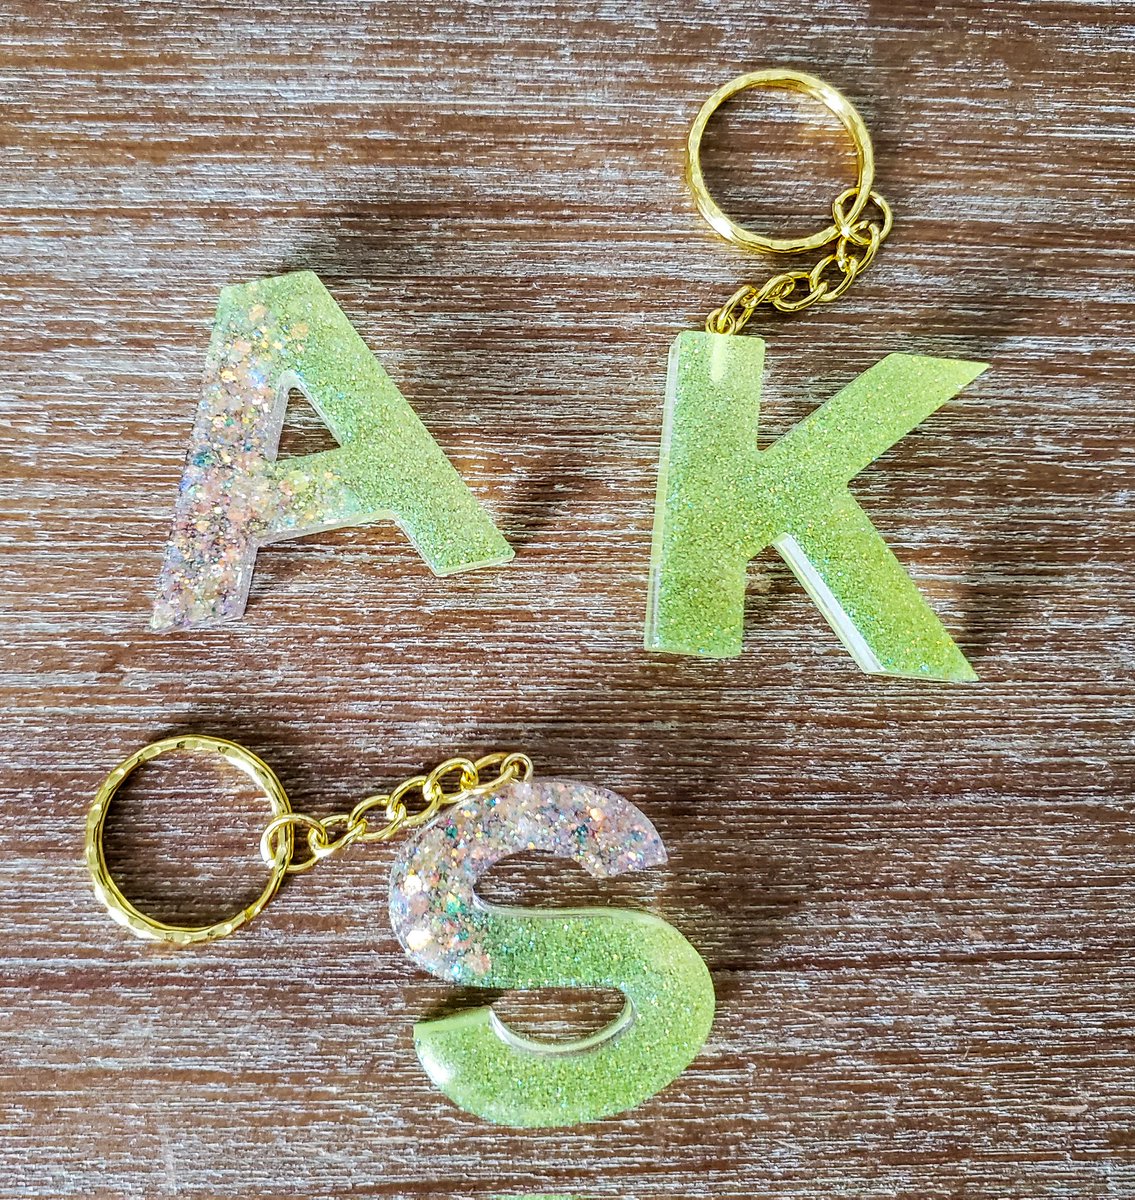 Colorful Glitter Initial Keychains ✨️🌈
etsy.com/listing/156595…
#EtsySeller #HandmadeHour #giftideas #giftsformom #mothersdaygifts #womaninbizhour #SpringEquinox #Spring #resin #keychain #rainbow #glitter #PersonalizedProducts #uniquegifts #wednesdaythought #HumpDay